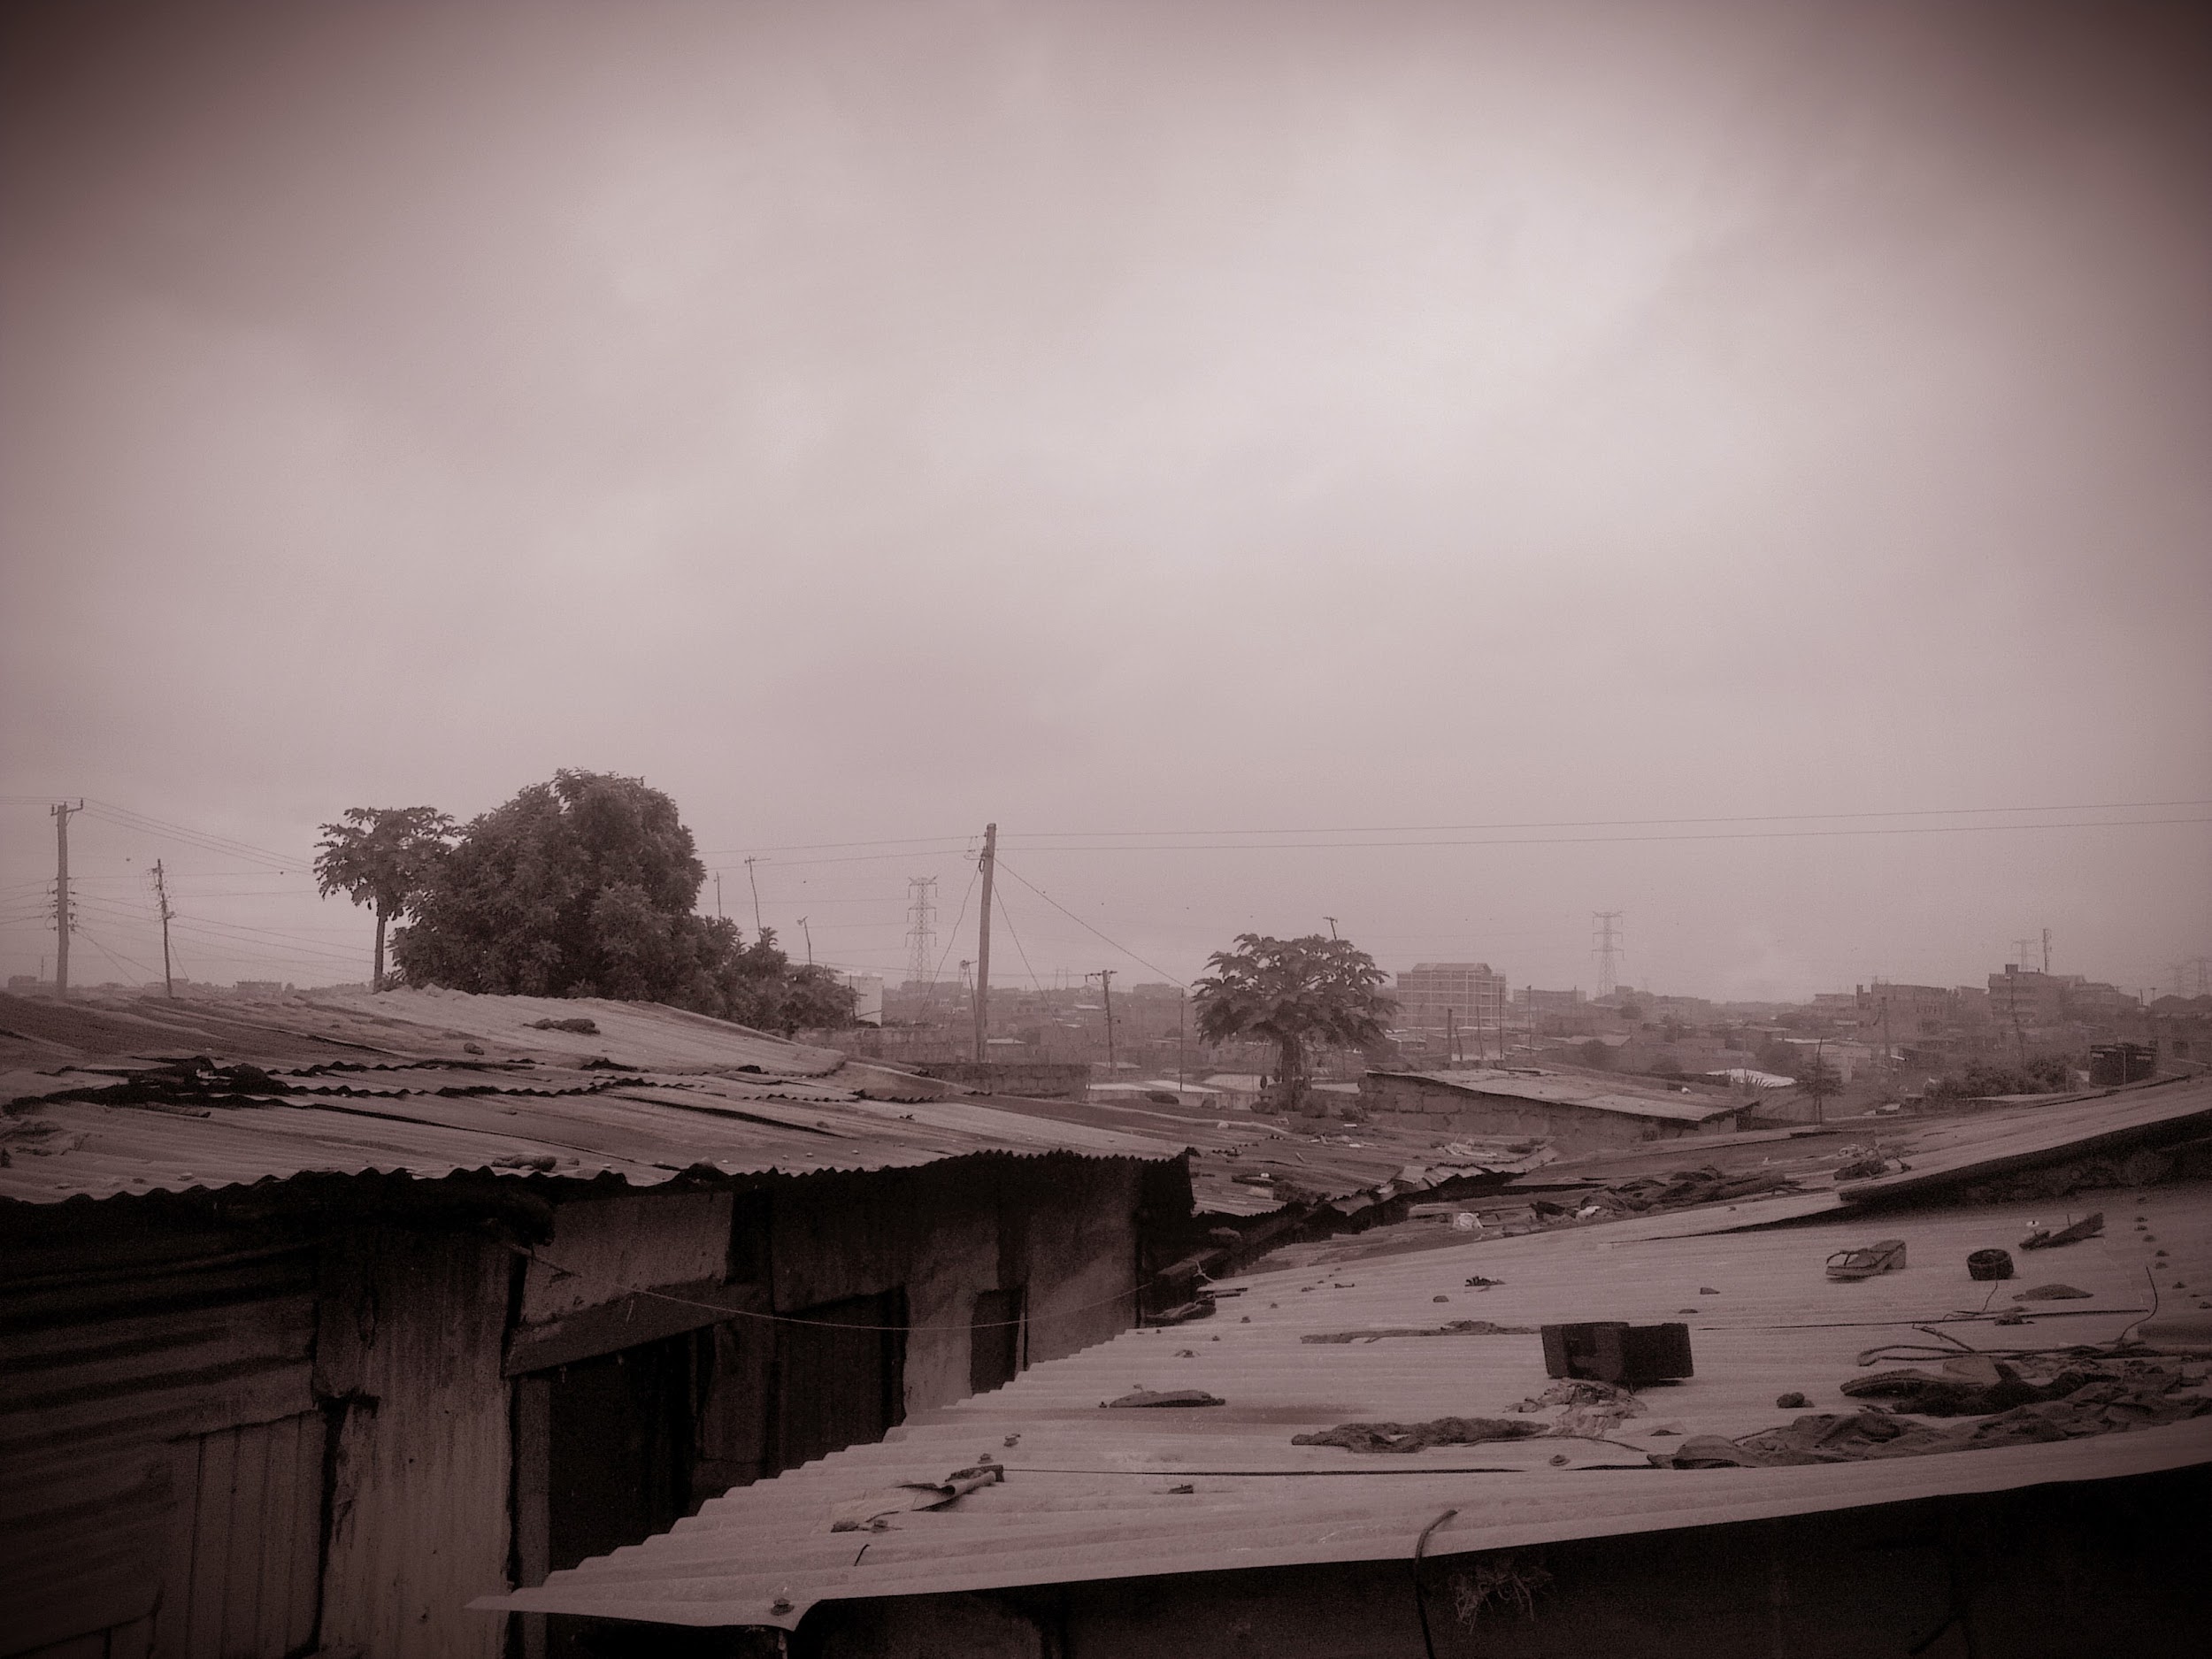 View over the rooftops of the Mali Saba Slum